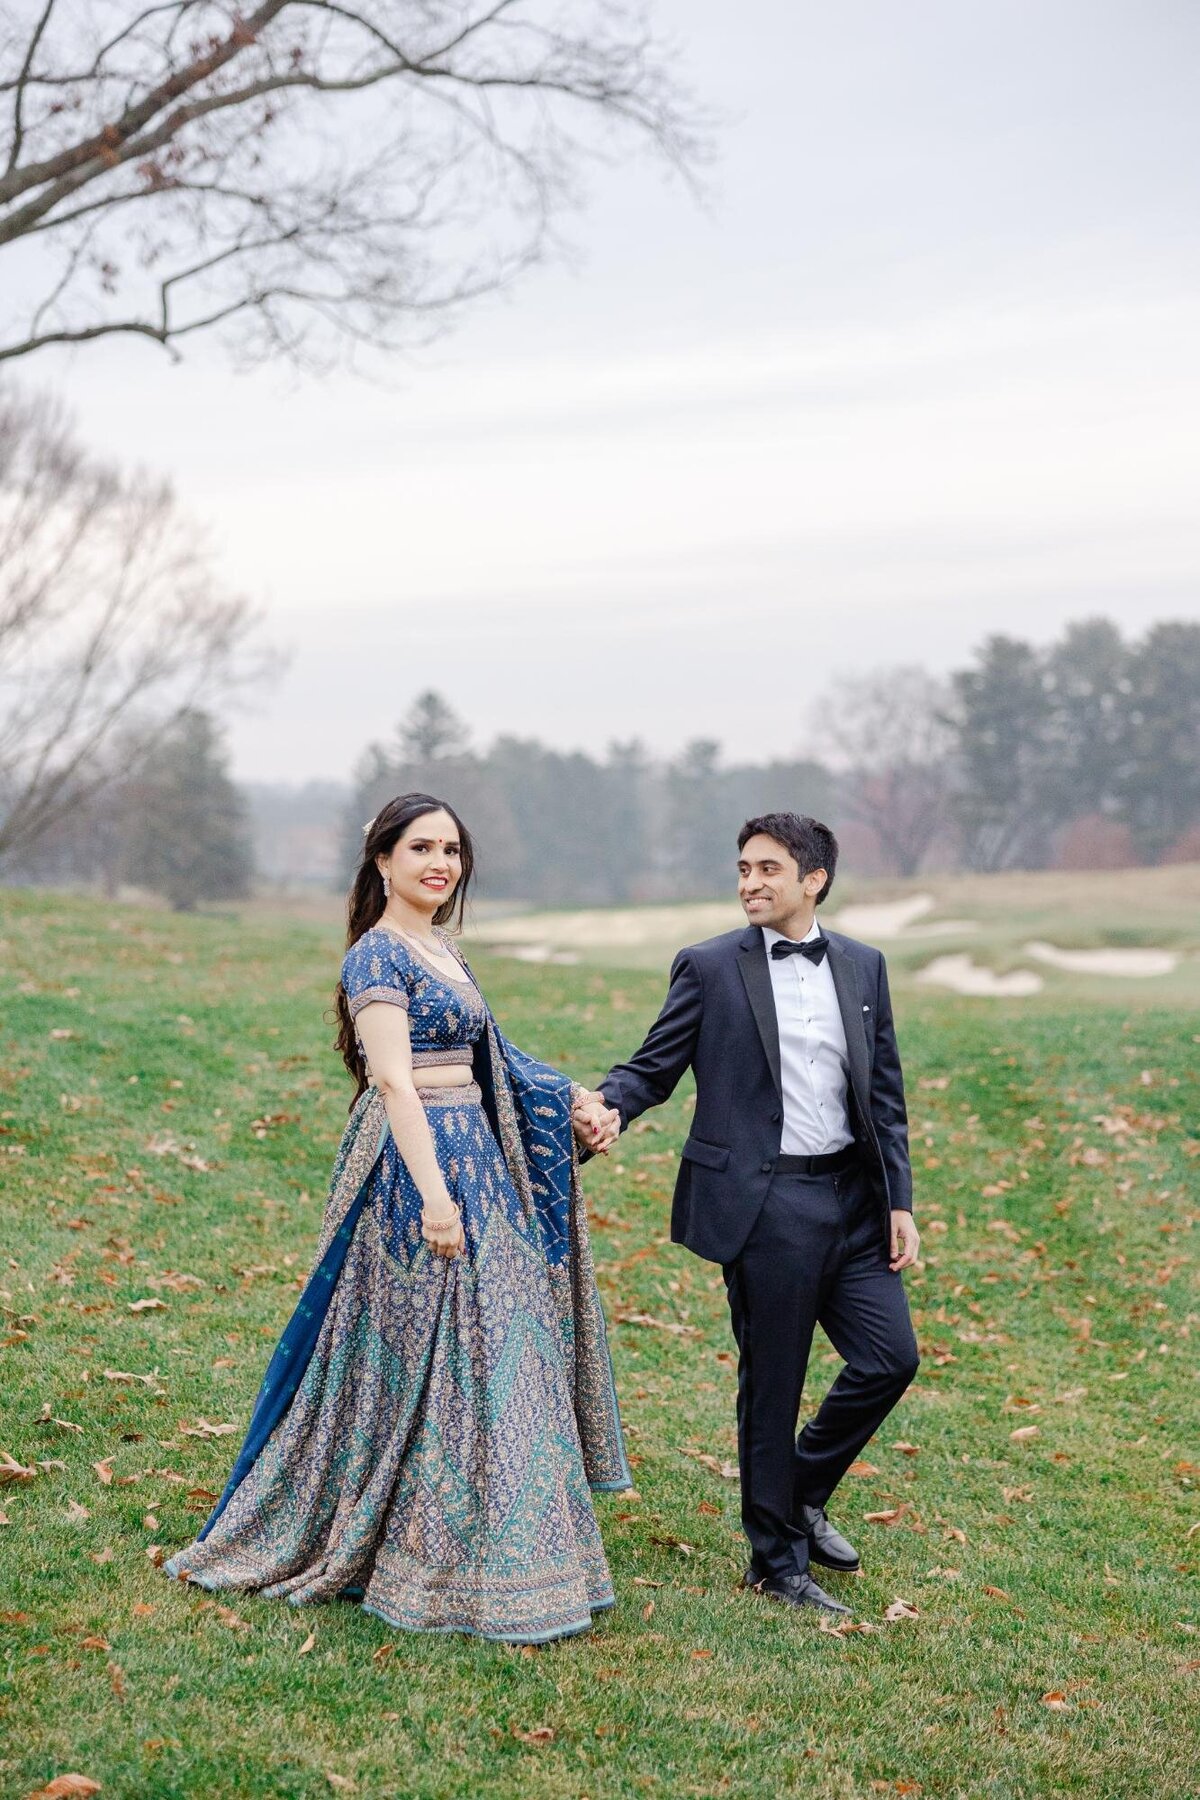 A couple in formal attire, the woman in a flowing blue dress and the man in a black tuxedo, walking hand in hand on a grassy field with a foggy background.